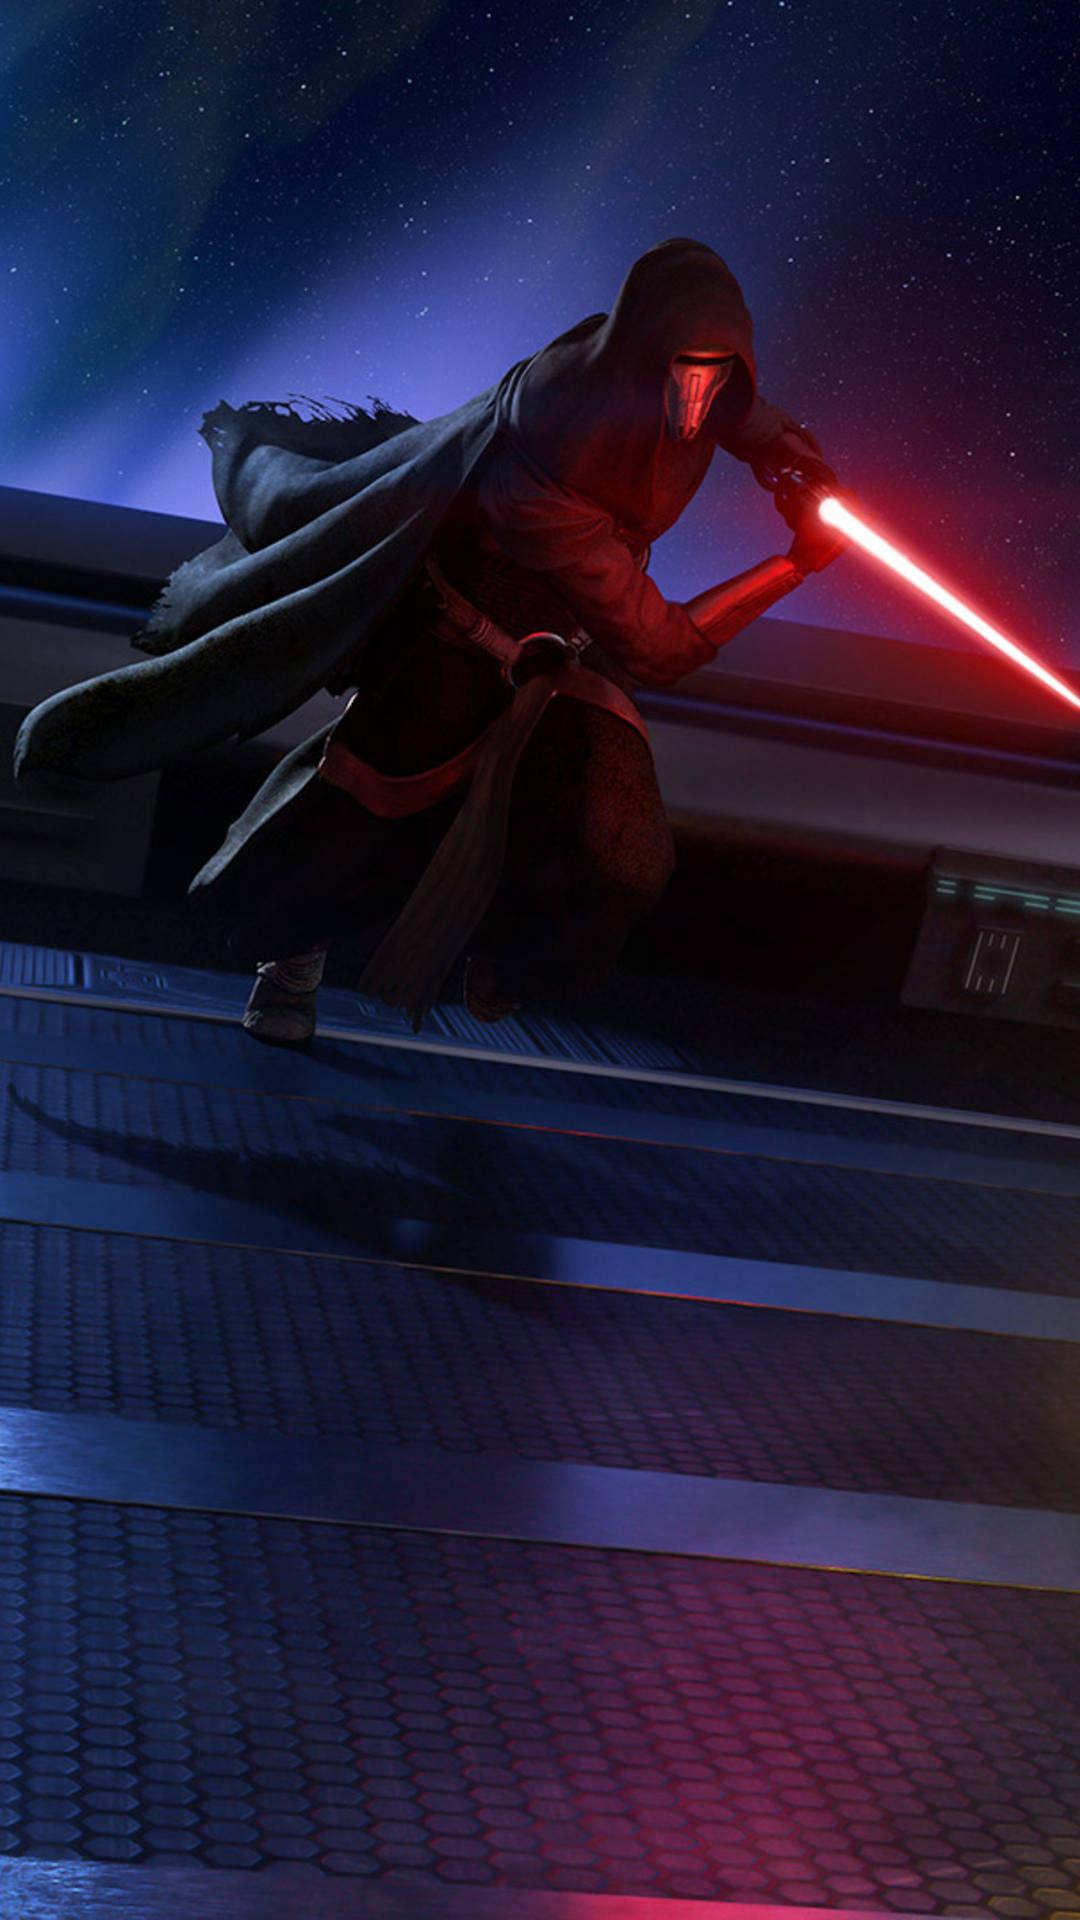 Darth Revan Attacking With Lightsaber